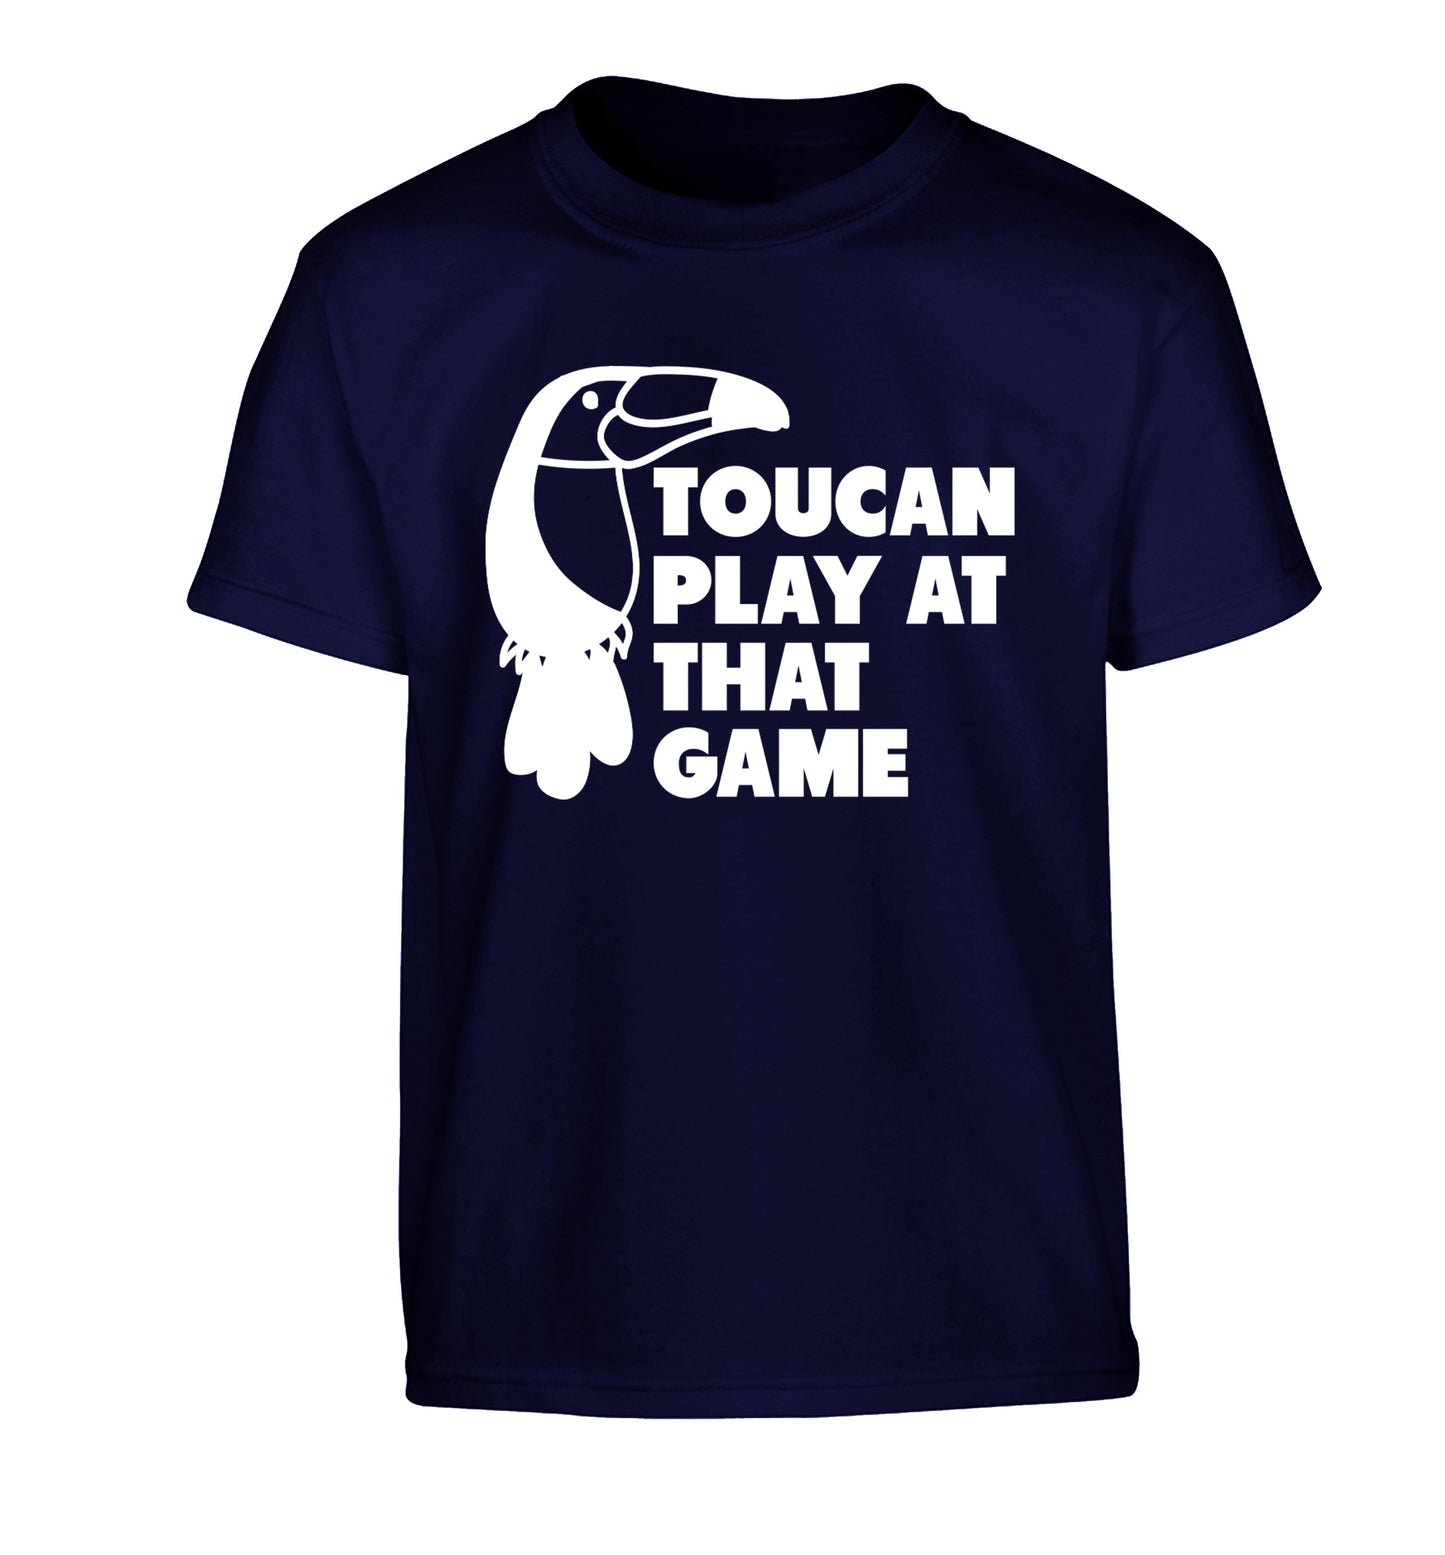 Toucan play at that game Children's navy Tshirt 12-13 Years